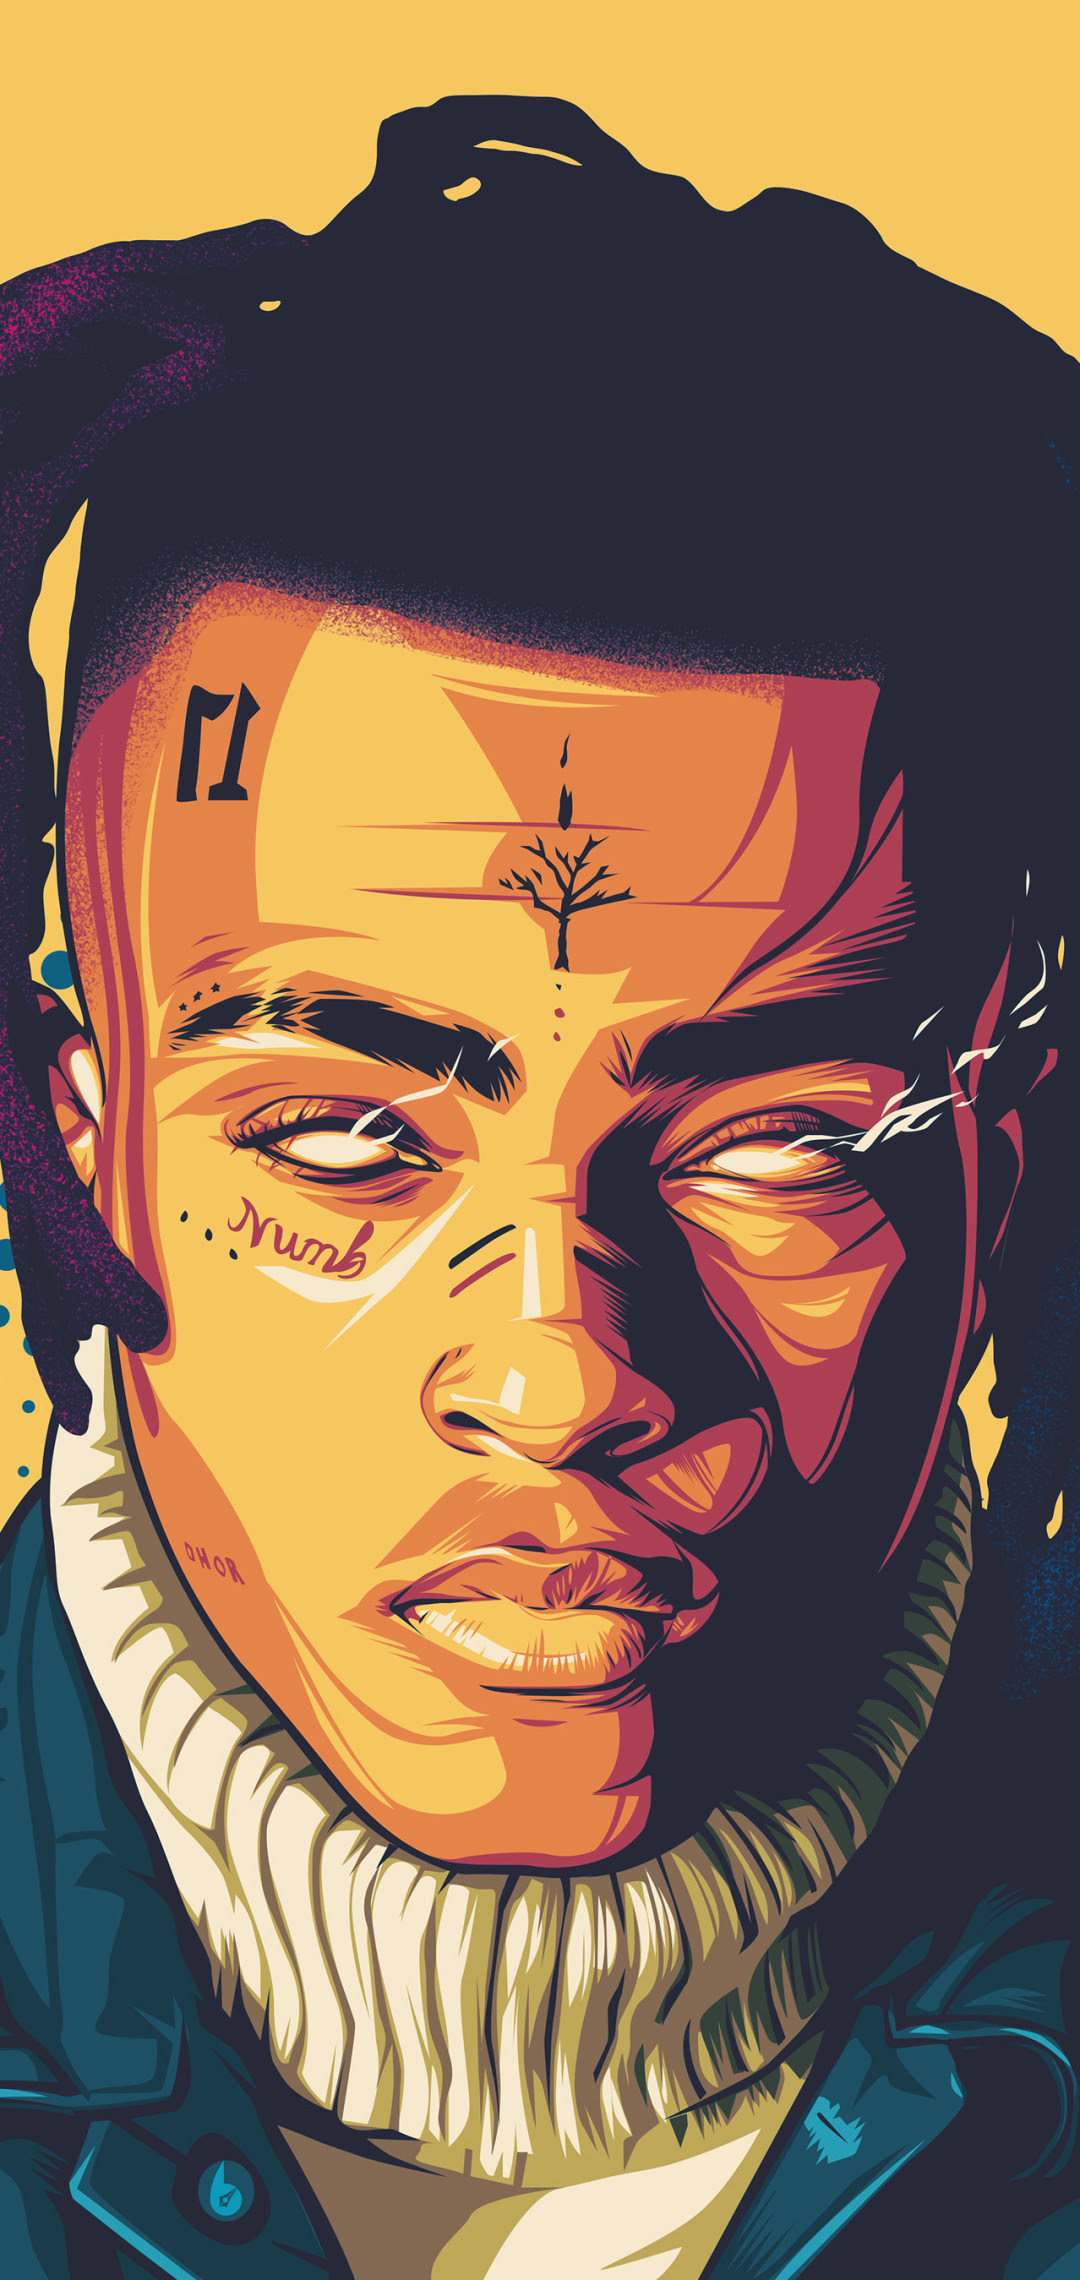 Xxxtentacion Wallpaper, Something About XXXTentacion + Search Tool, We've gathered more than 5 million image uploaded by our users and sorted them by the most popular ones